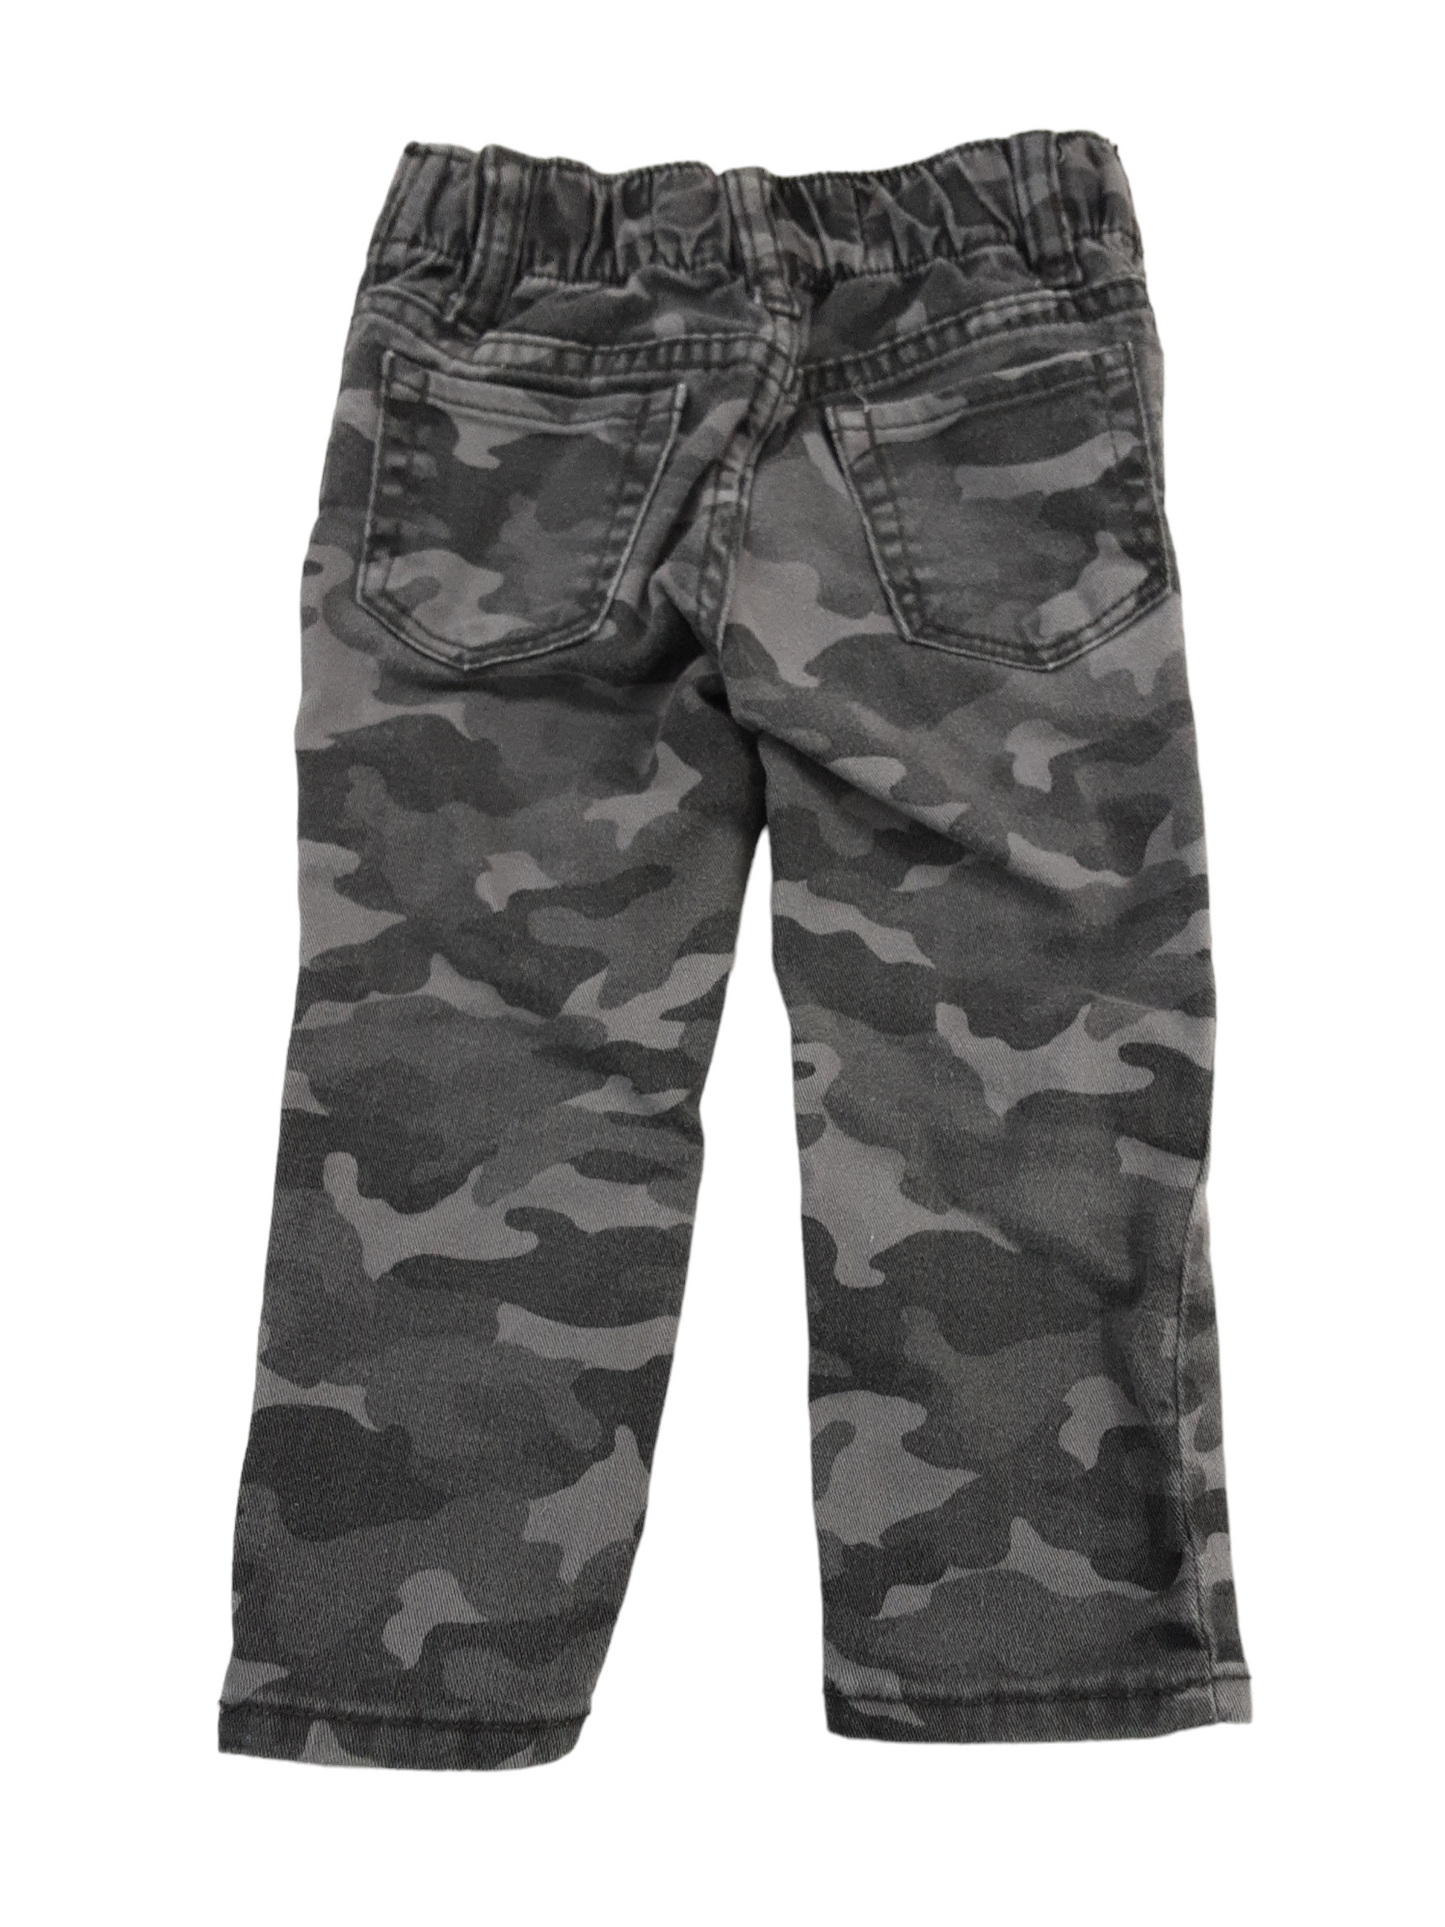 Camouflage pants size 18-24months